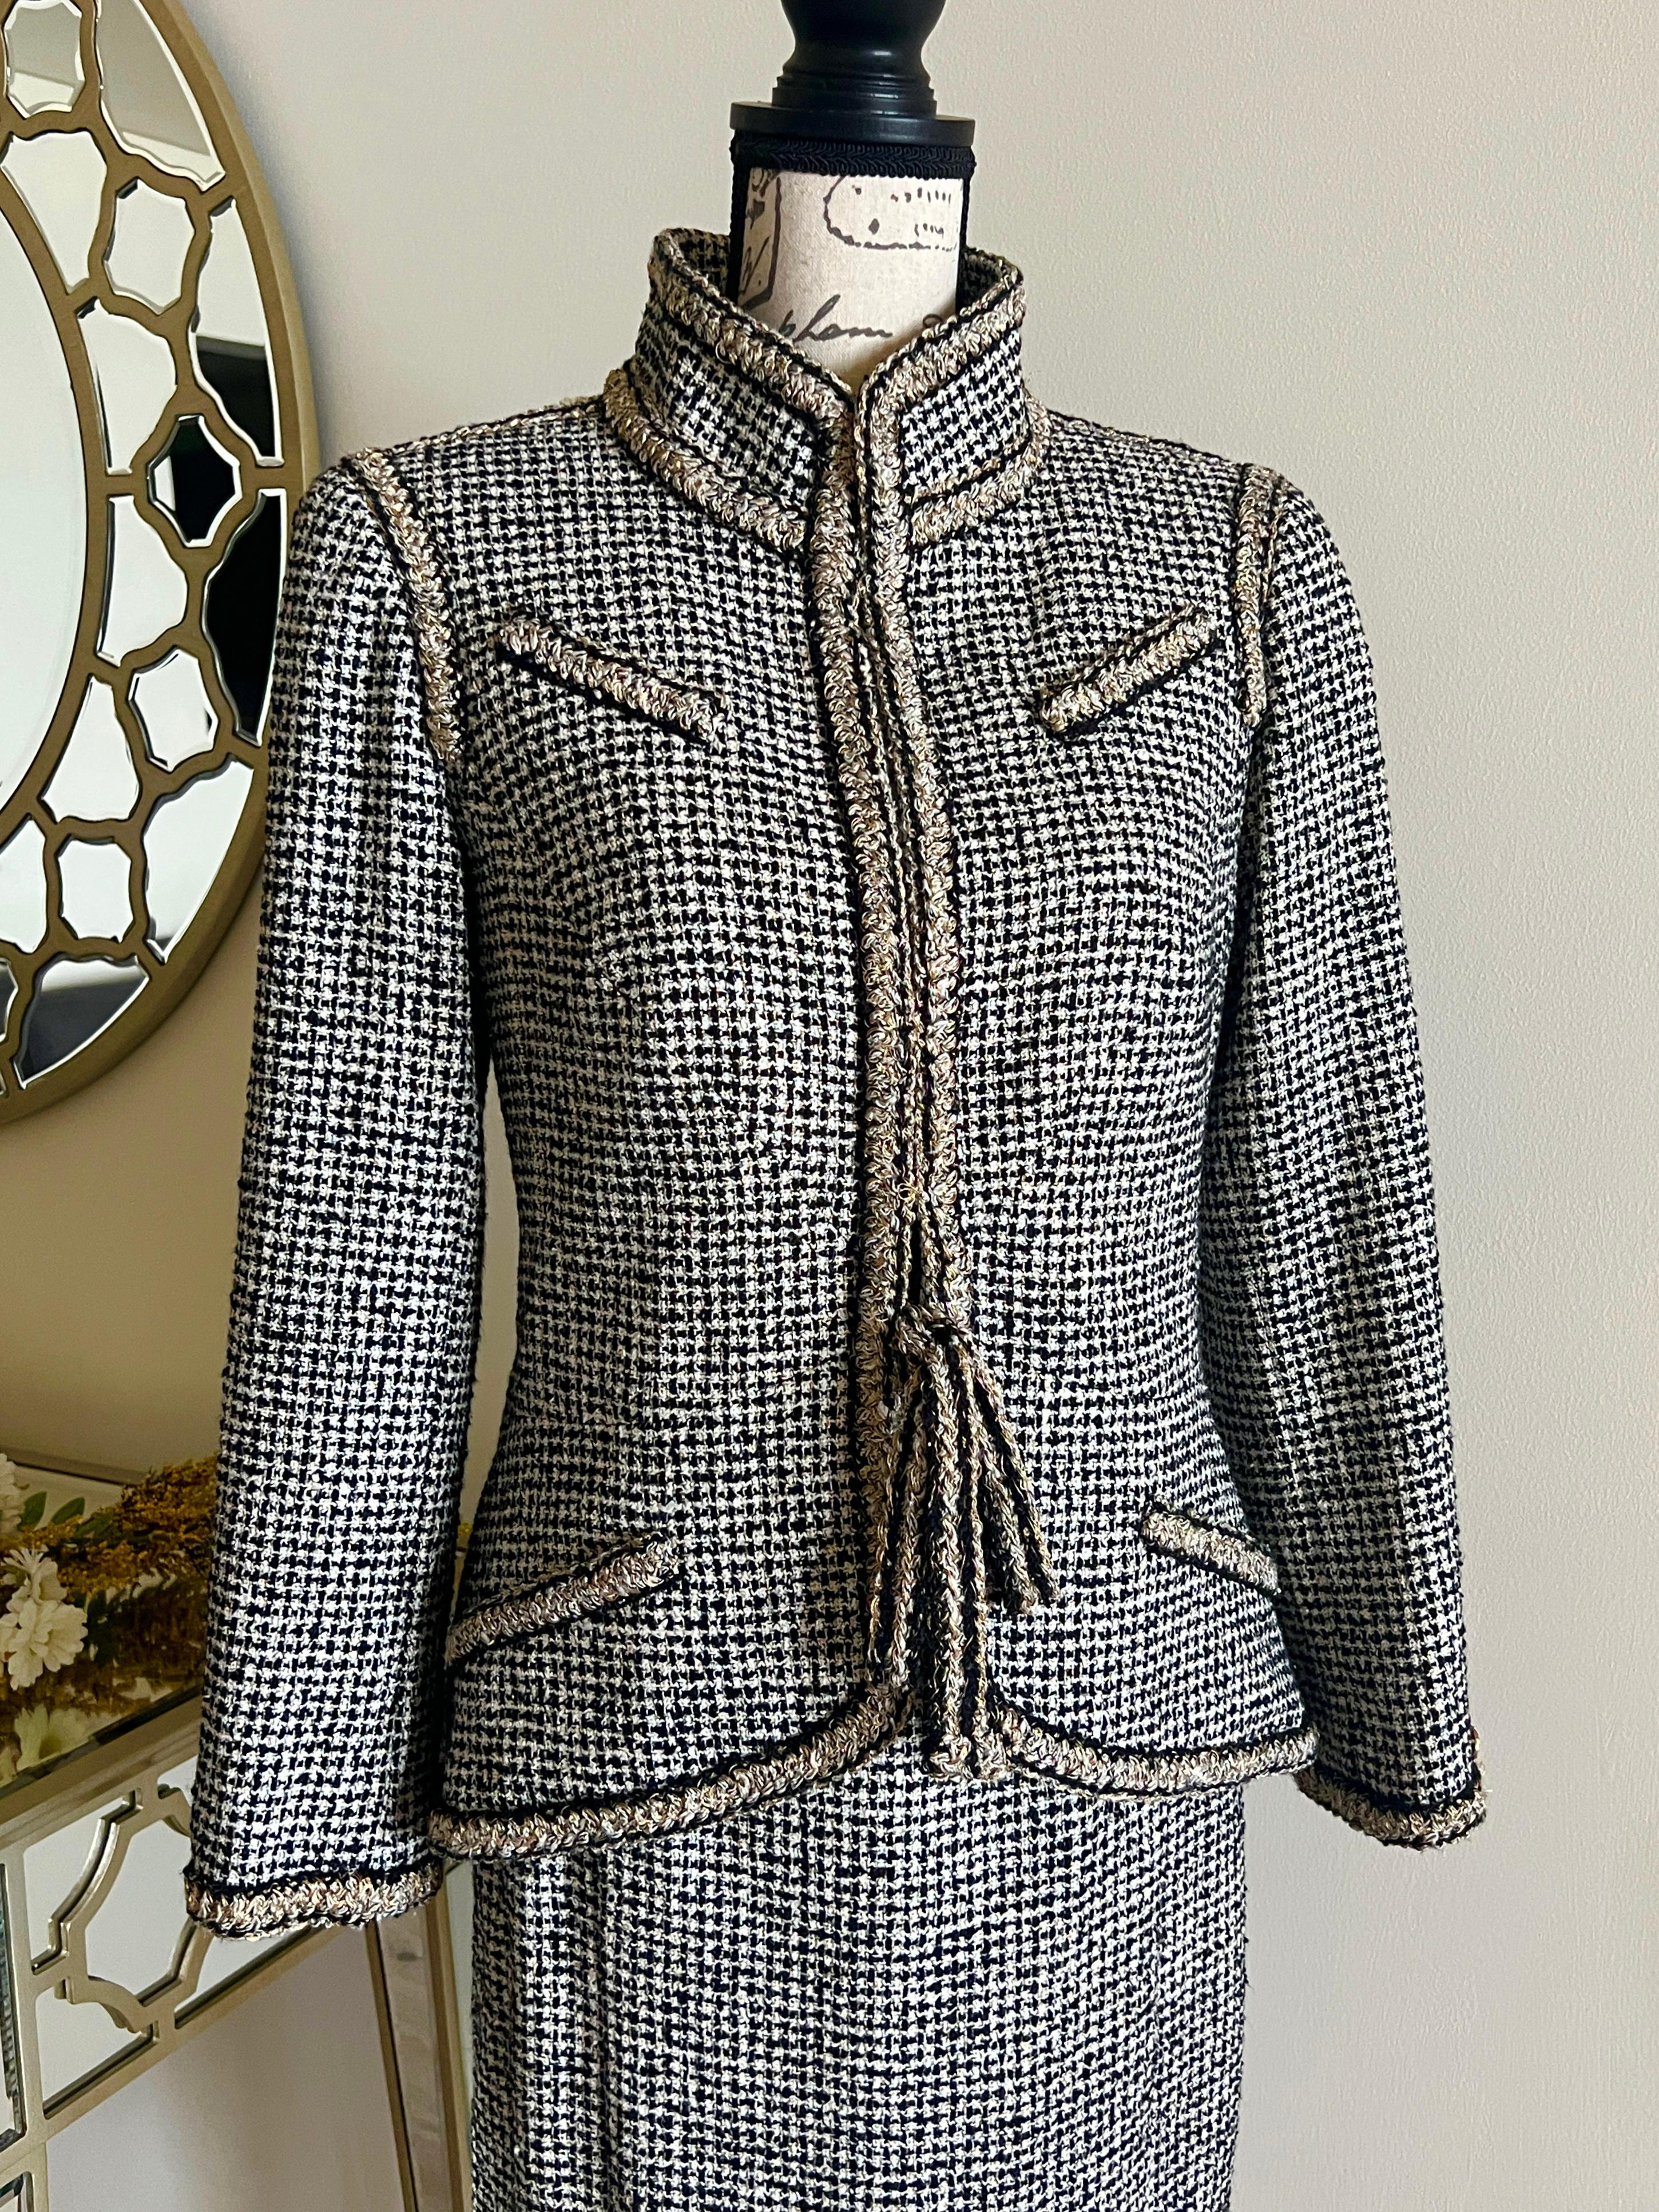 Chanel New Venice Collection Lesage Tweed Suit For Sale 6